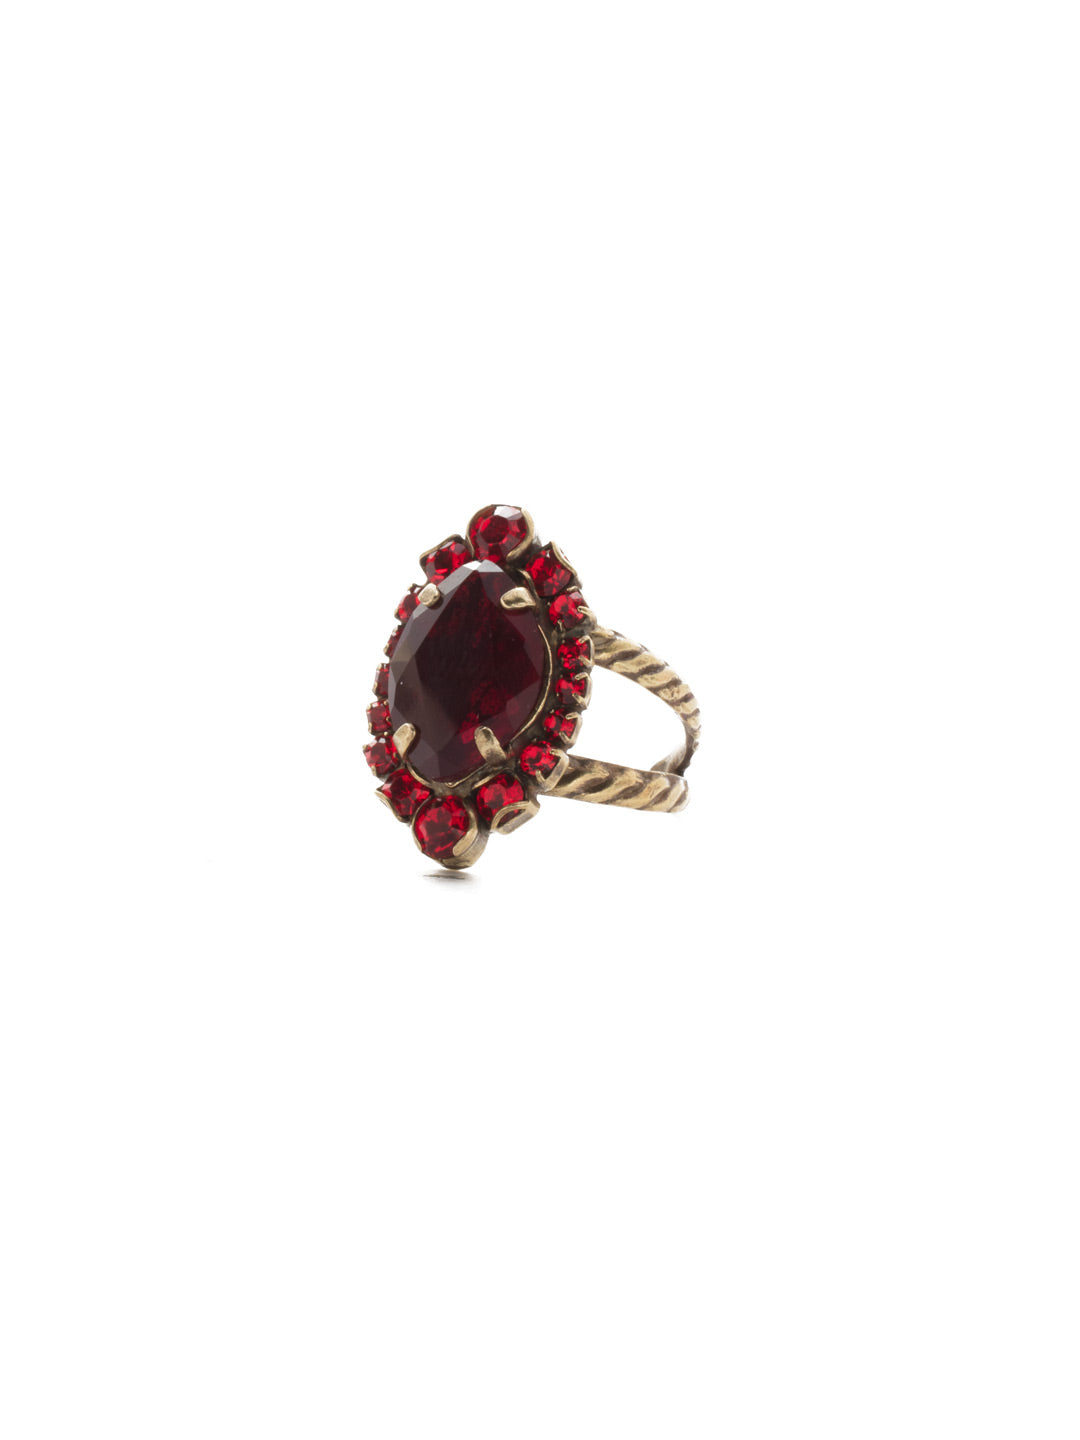 Eustoma Cocktail Ring - RDS44AGSNR - <p>A geometric gem surrounded by petite rounds of alternating colors. This fun ring offers just the right pop of sparkle. From Sorrelli's Sansa Red collection in our Antique Gold-tone finish.</p>